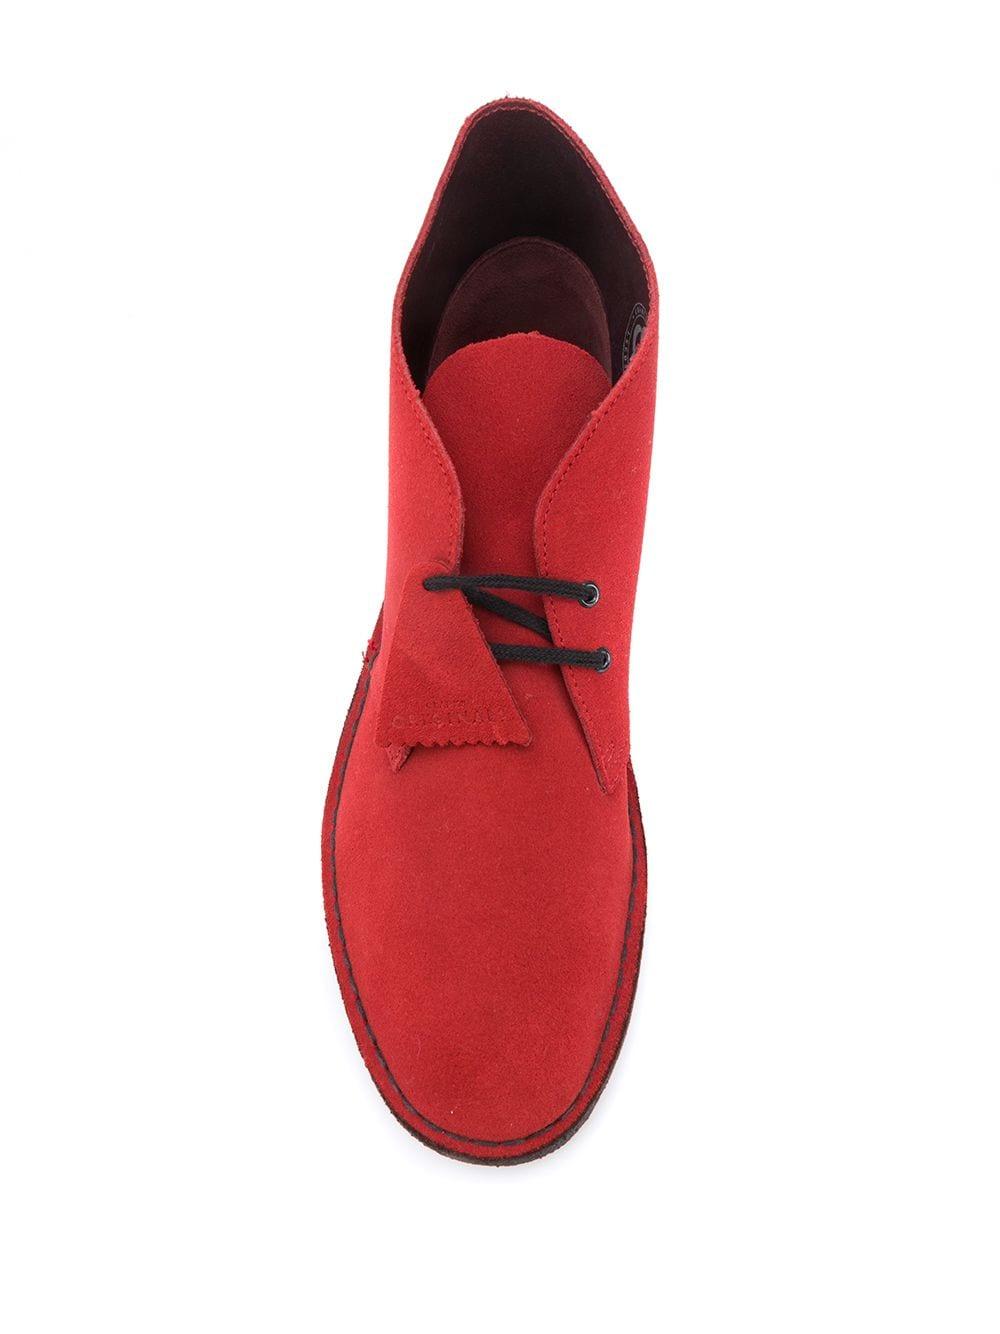 Clarks Red Desert Boots Luxembourg, SAVE 53% - fearthemecca.com